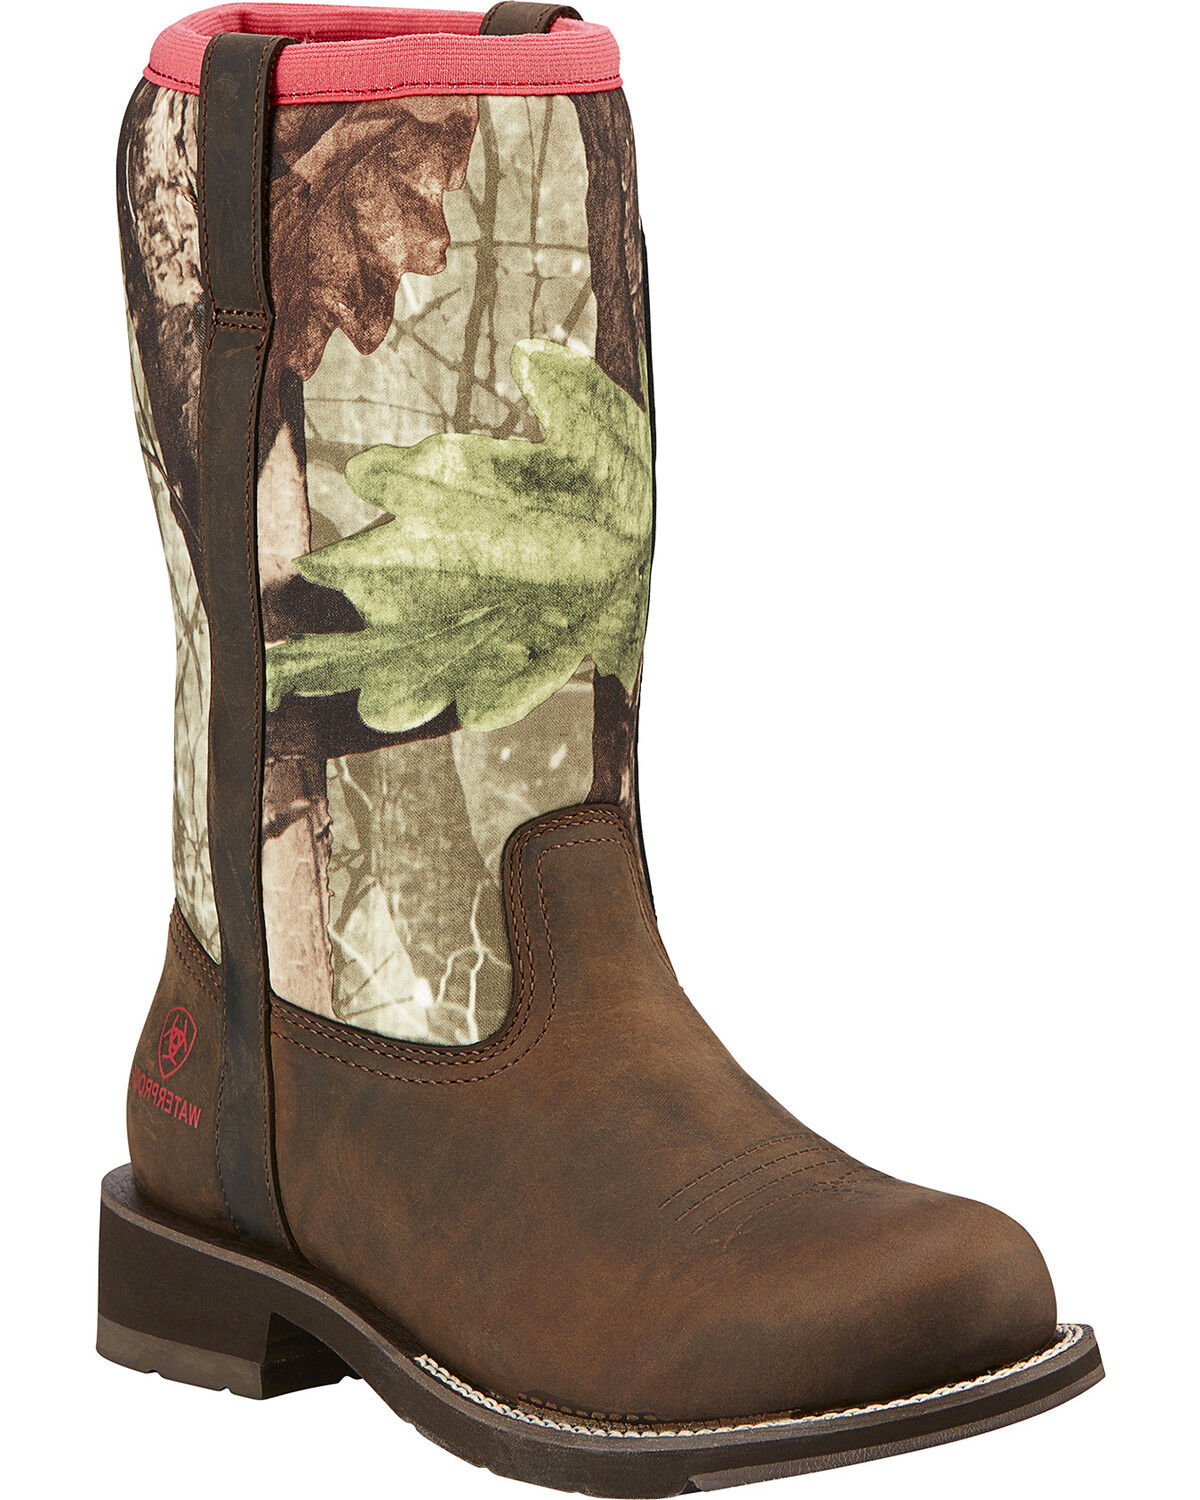 Ariat Women's Fatbaby All Weather 